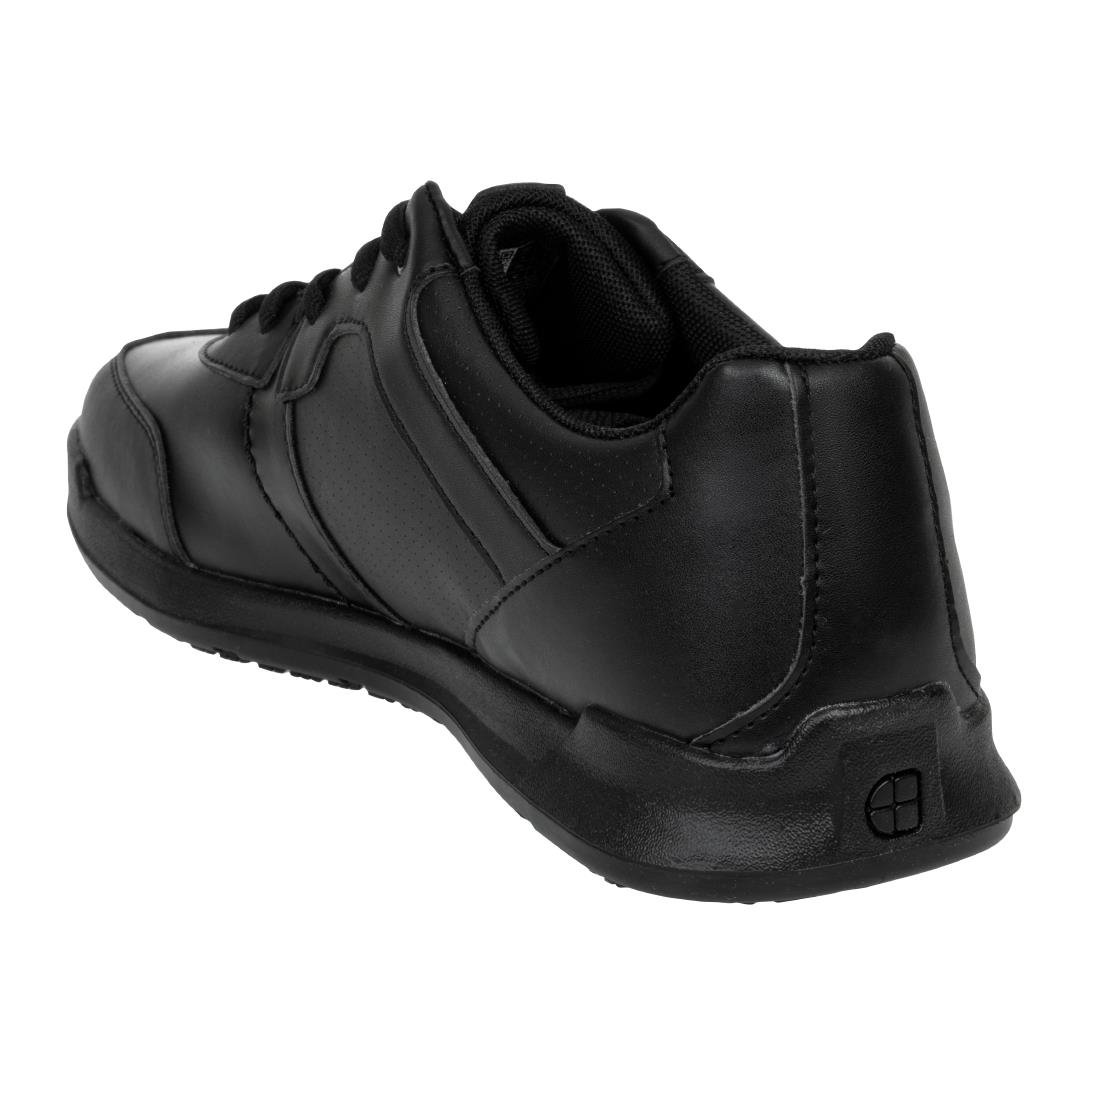 BB585-48 Shoes for Crews Freestyle Trainers Black Size 48